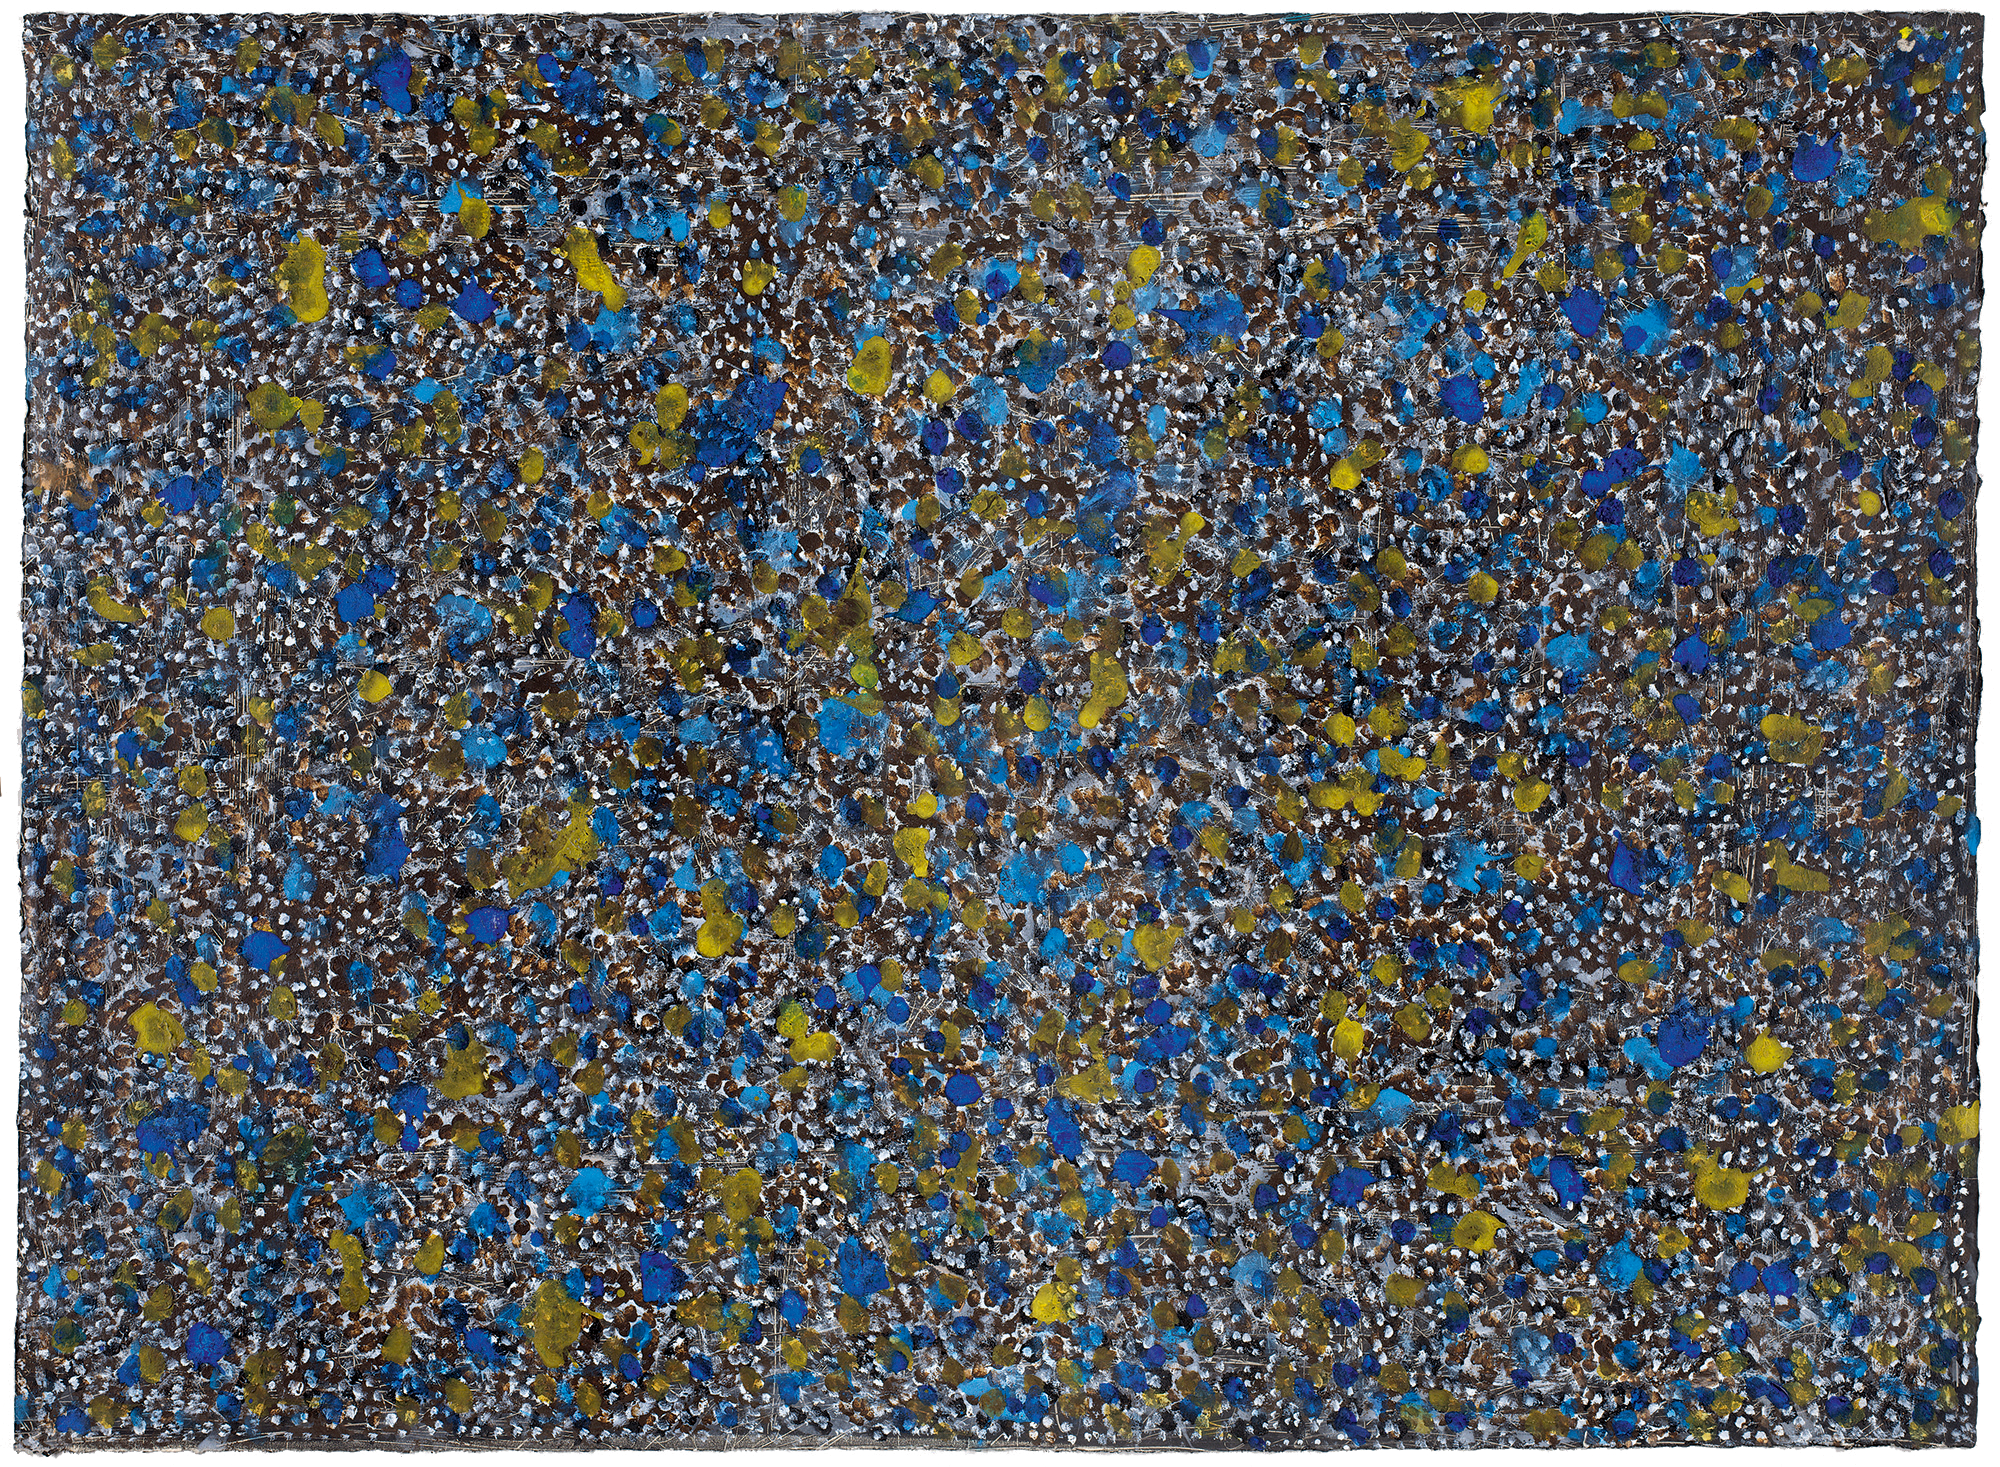 sylvia-spring-rock-and-daffodils – The Richard Pousette-Dart Foundation